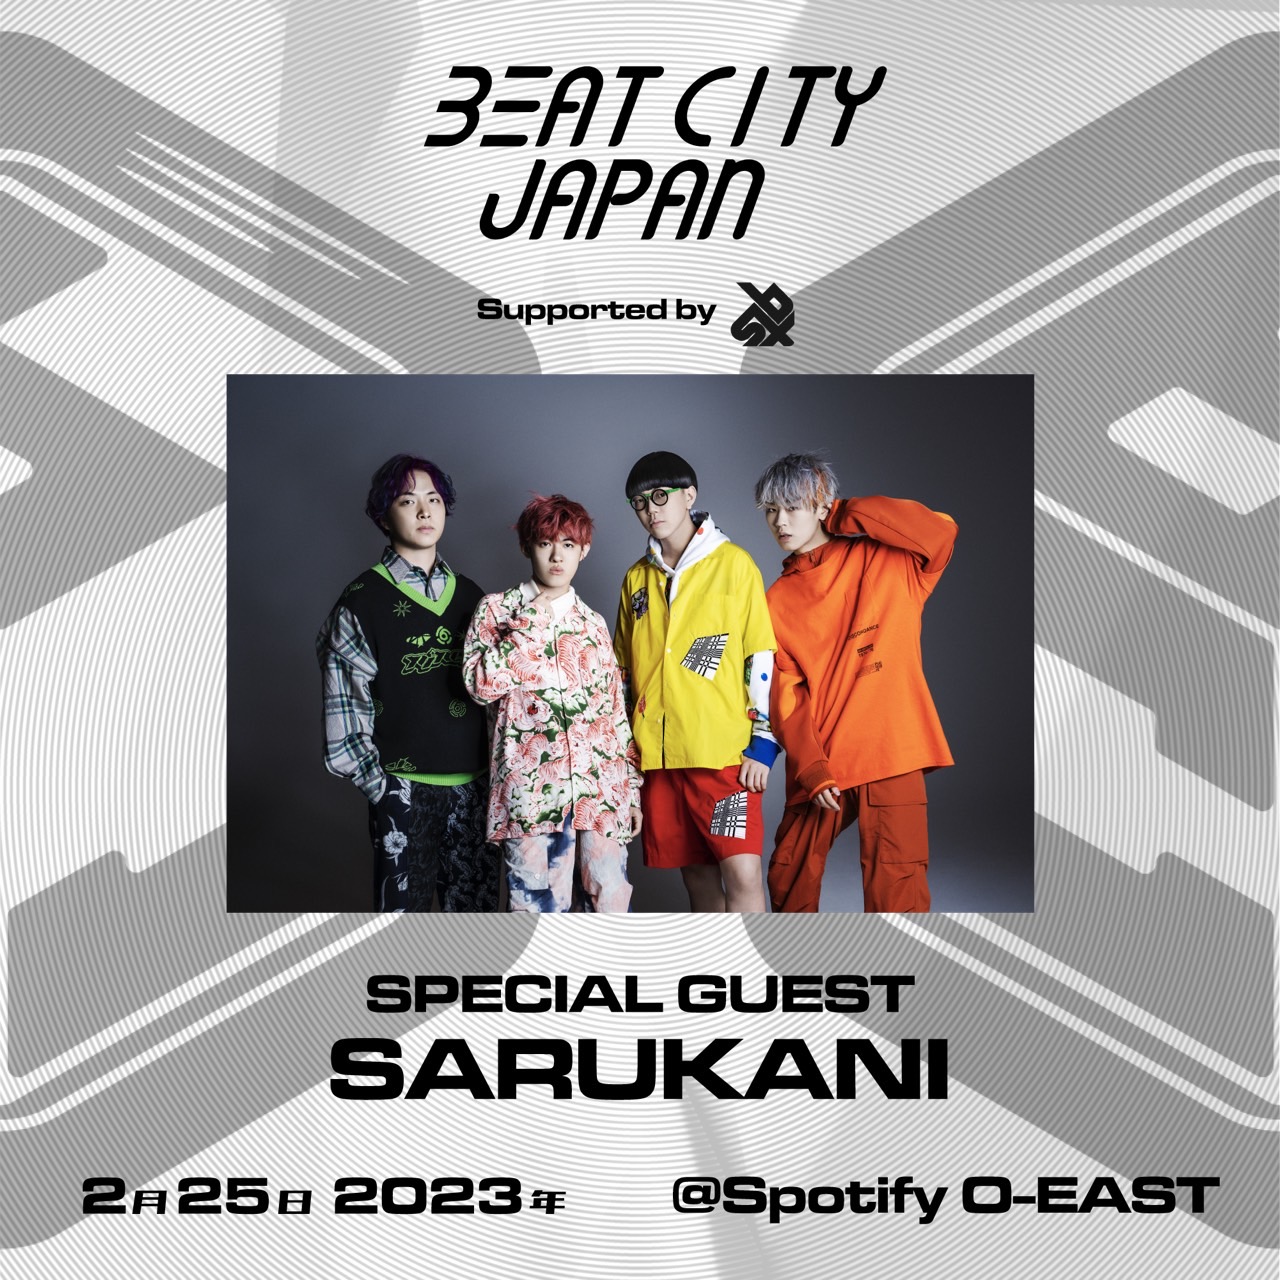 “BEATCITY JAPAN 2023 Supported by Swissbeatbox”